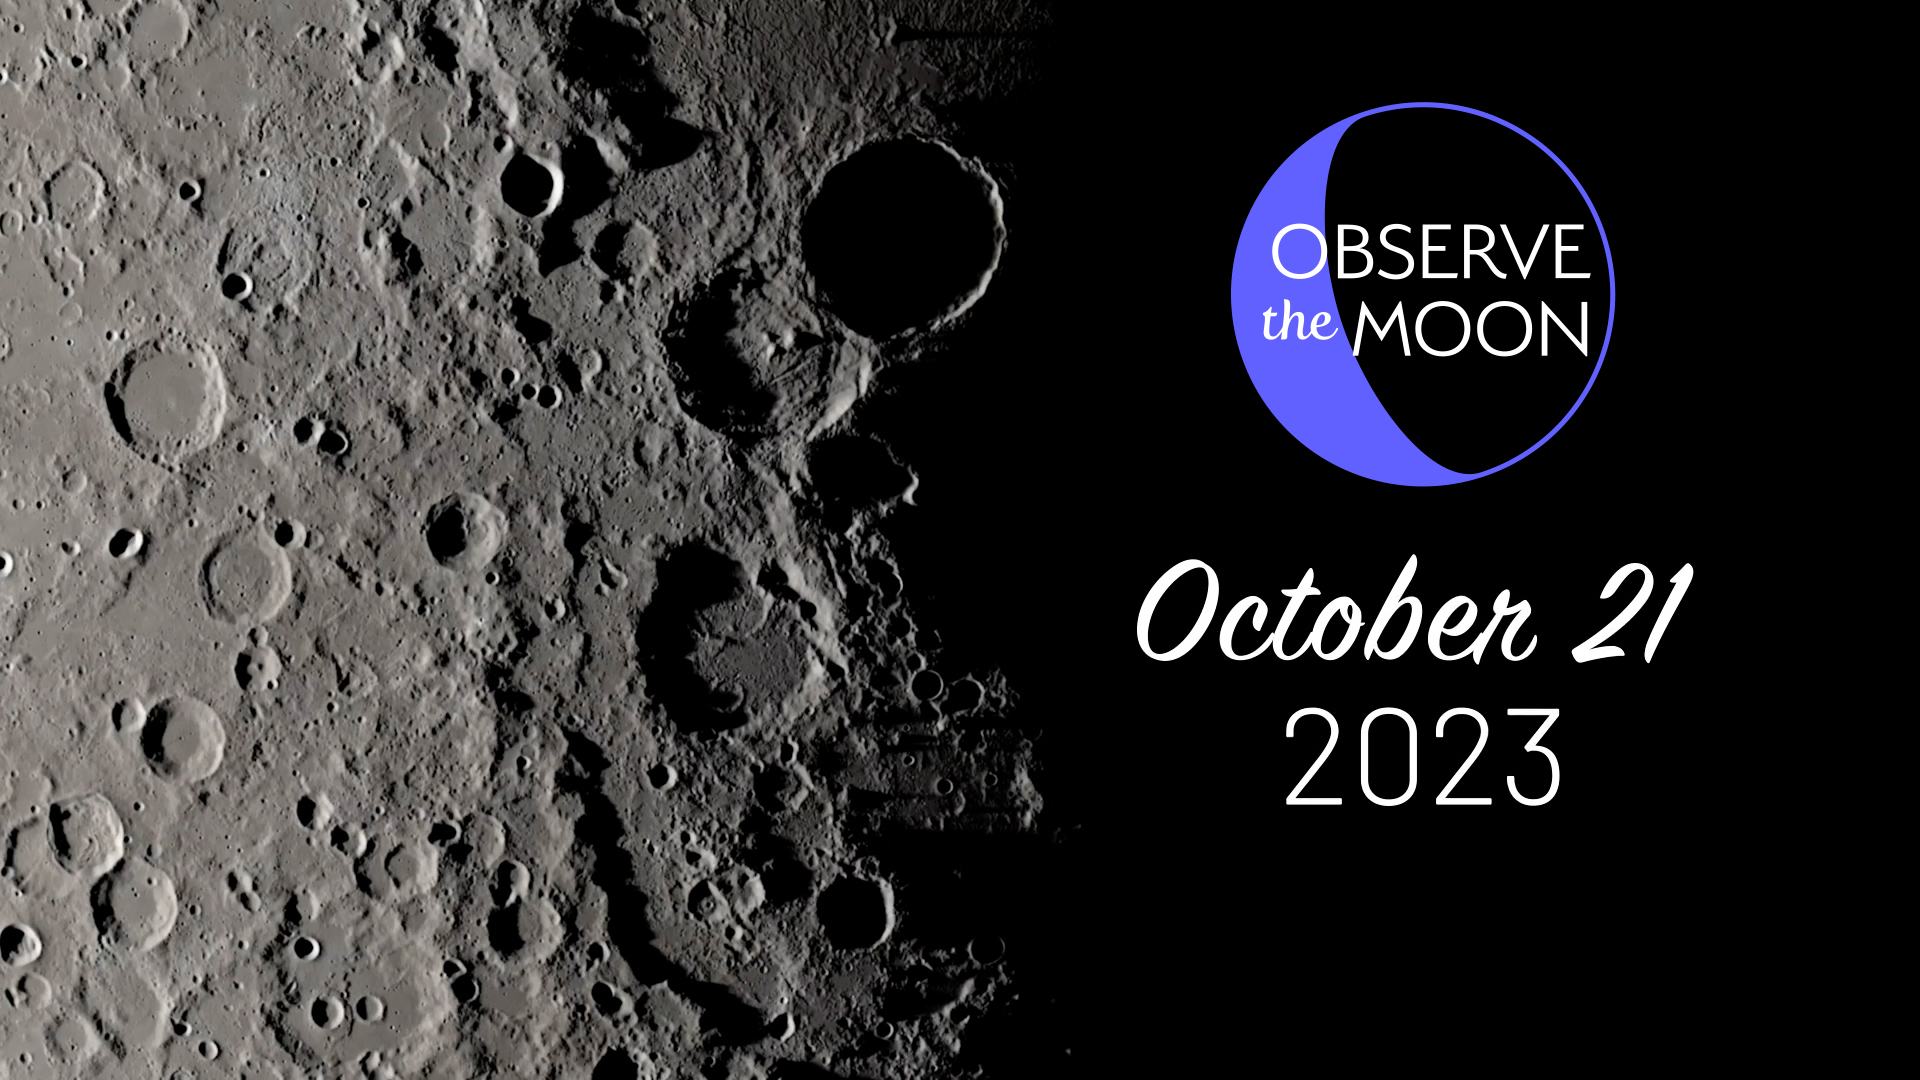 2023 International Observe the Moon Night broadcast - Hosted by Lauren WardWatch this video on the NASA Goddard YouTube channel.